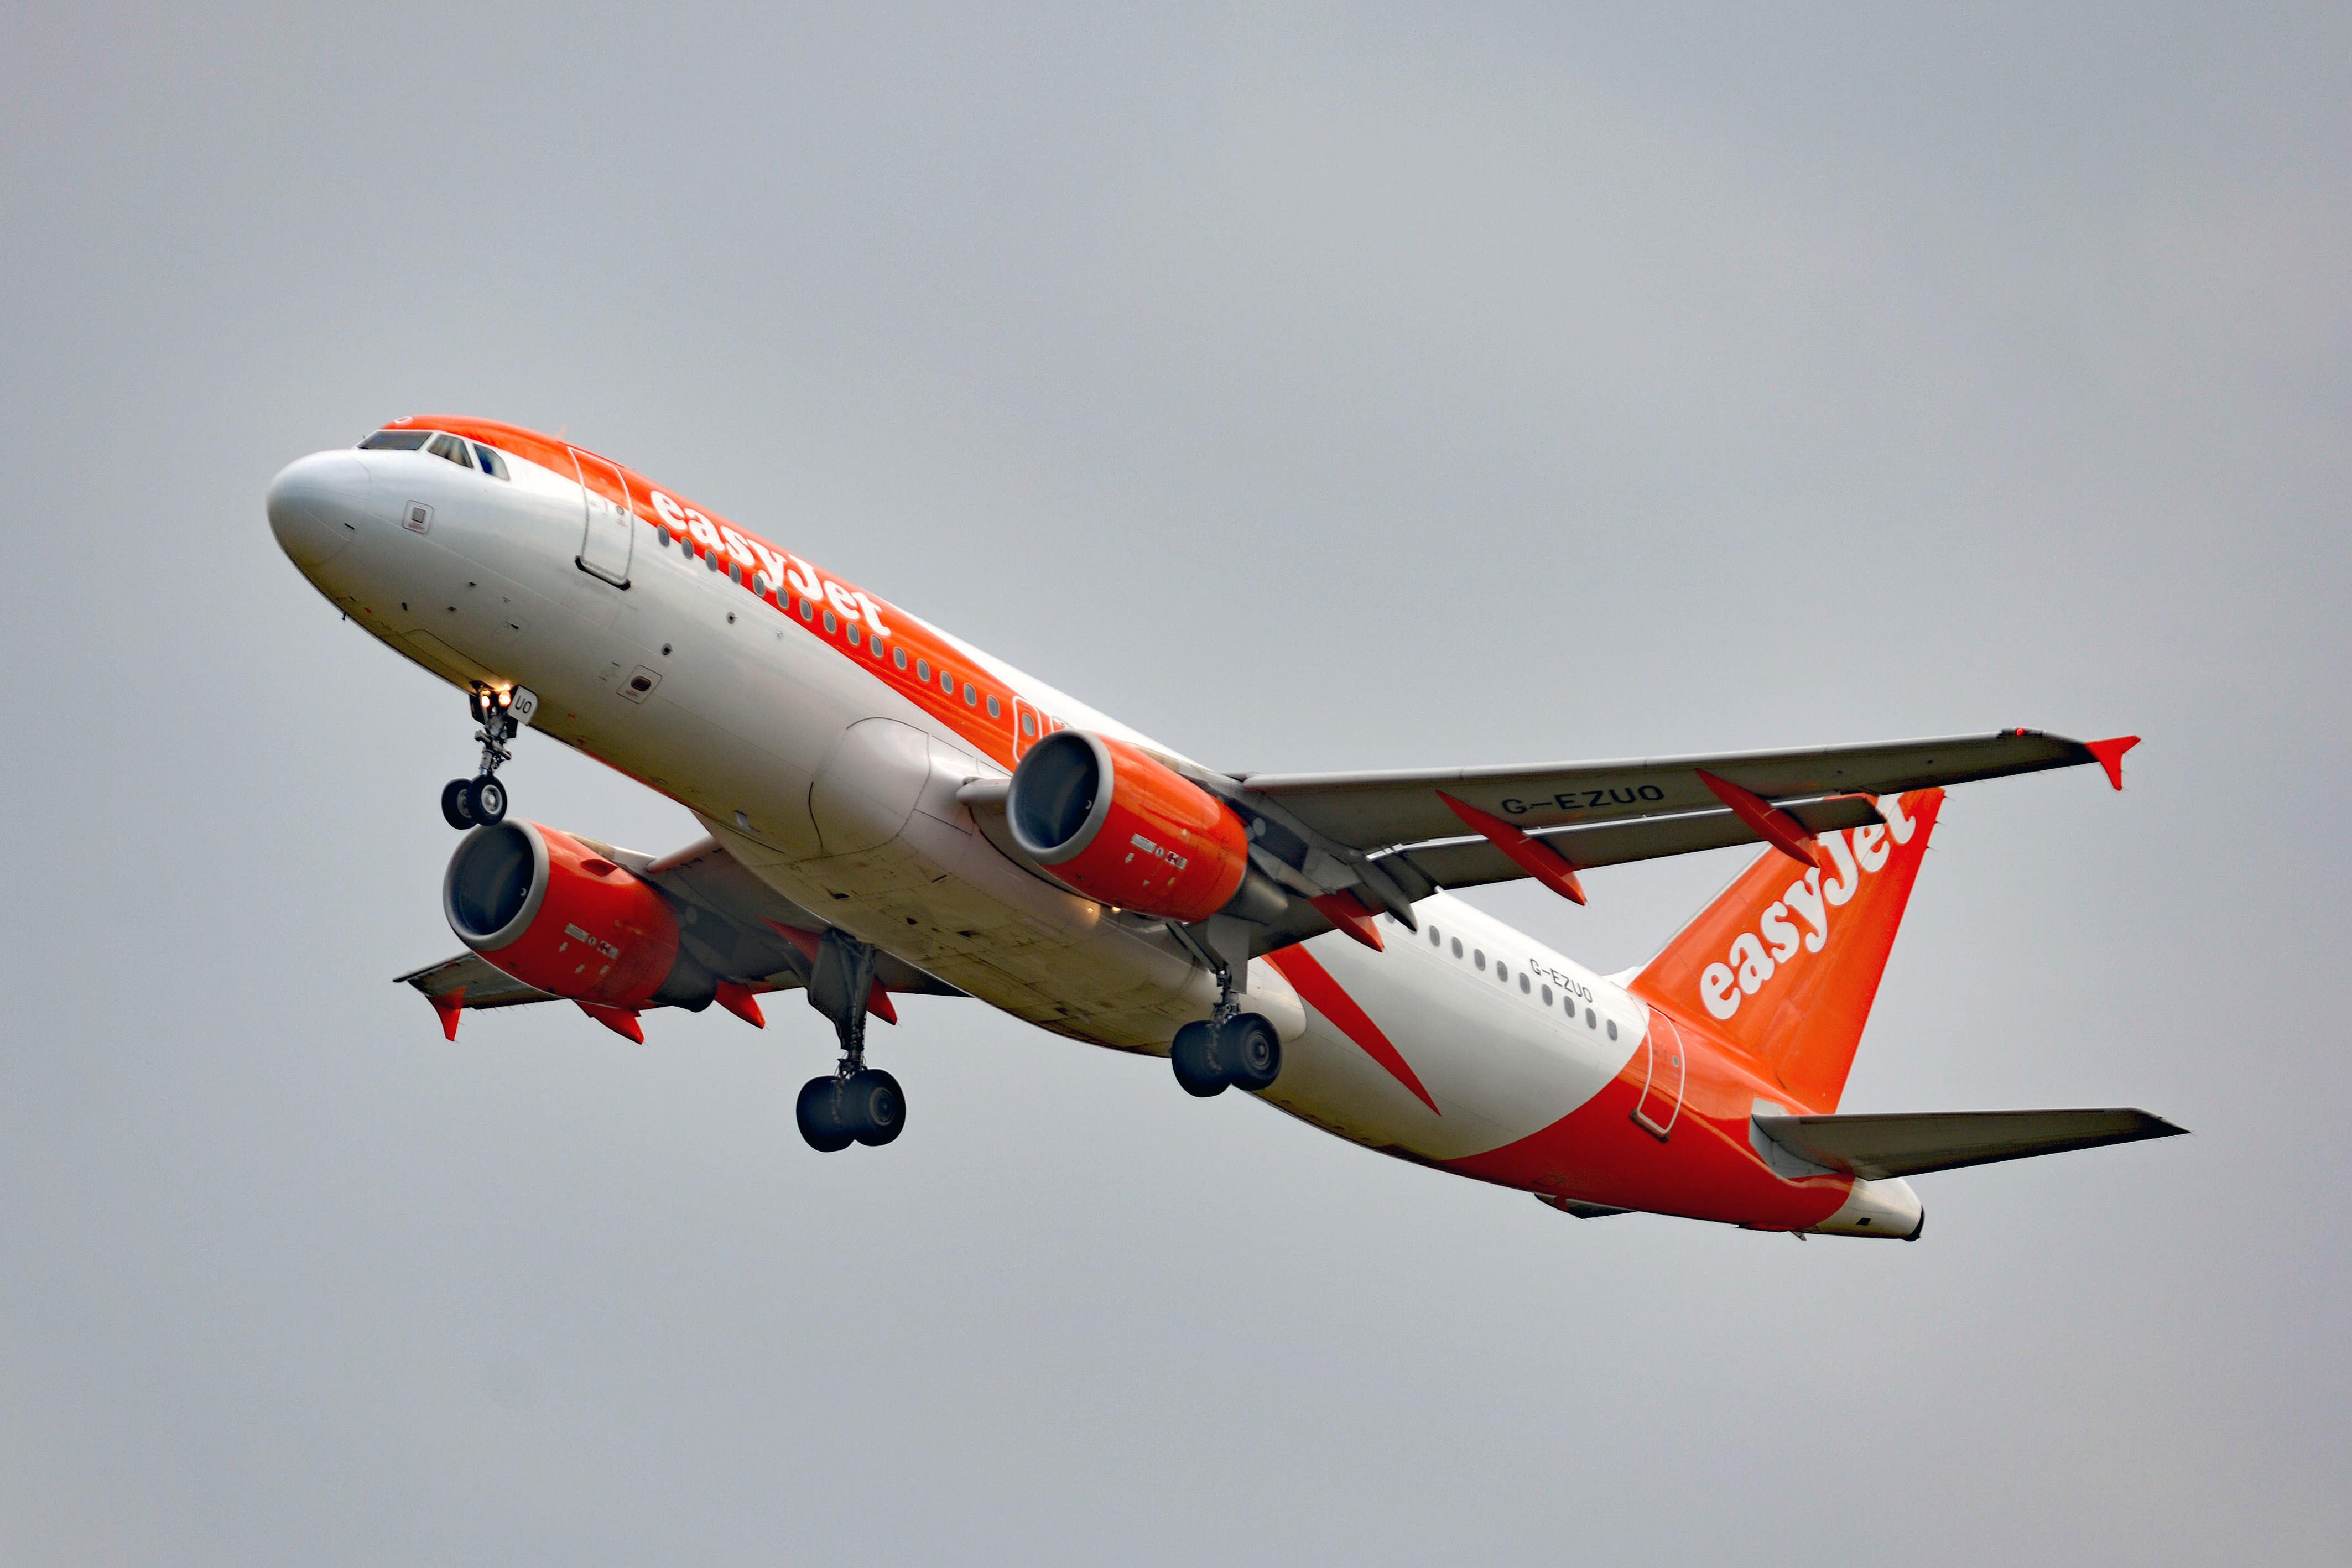 Both easyJet flights were cancelled due to bad weather